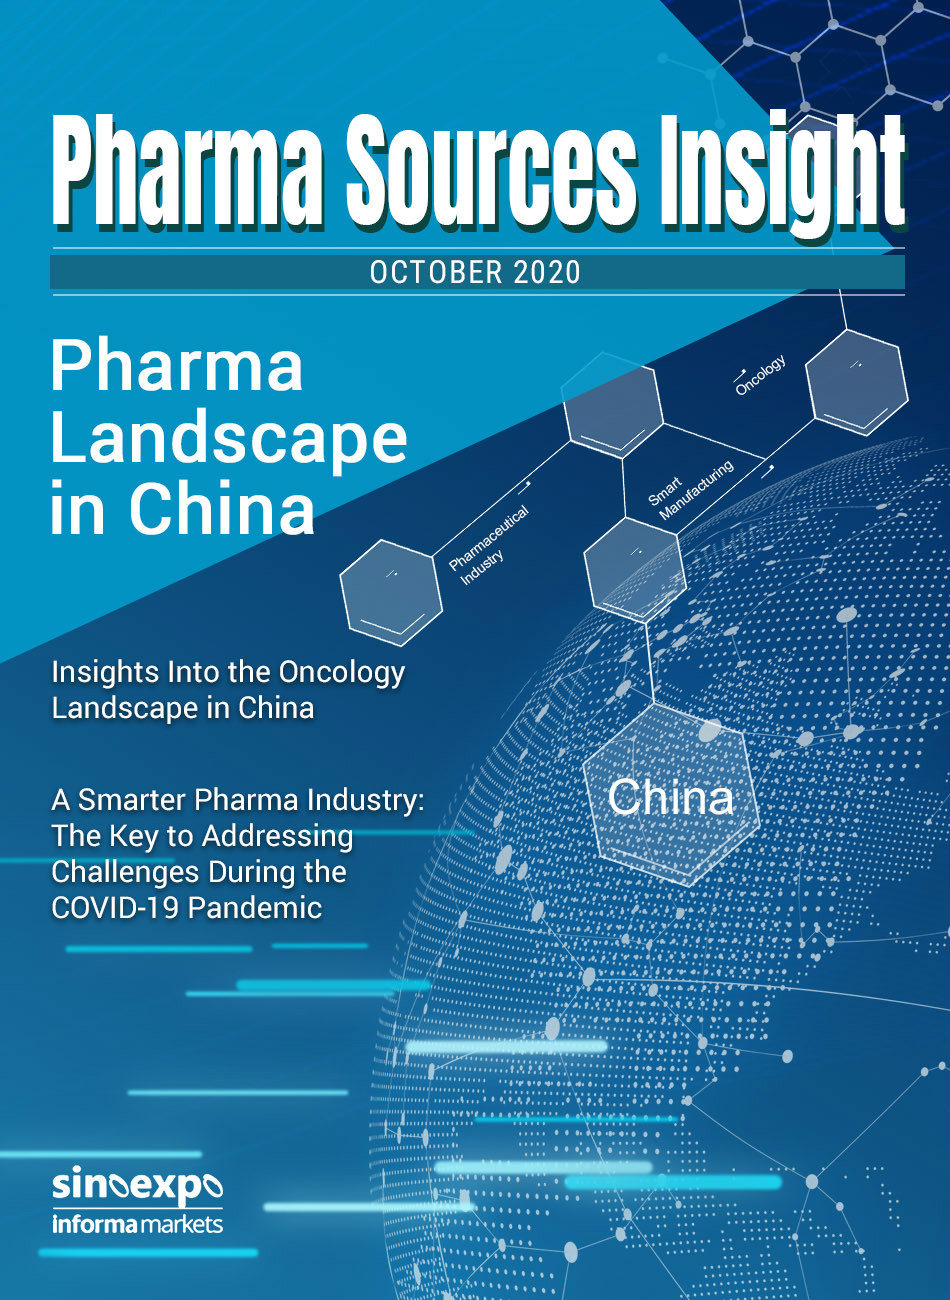 Pharma Sources Insight October 2020 Provides Pharma Landscape in China